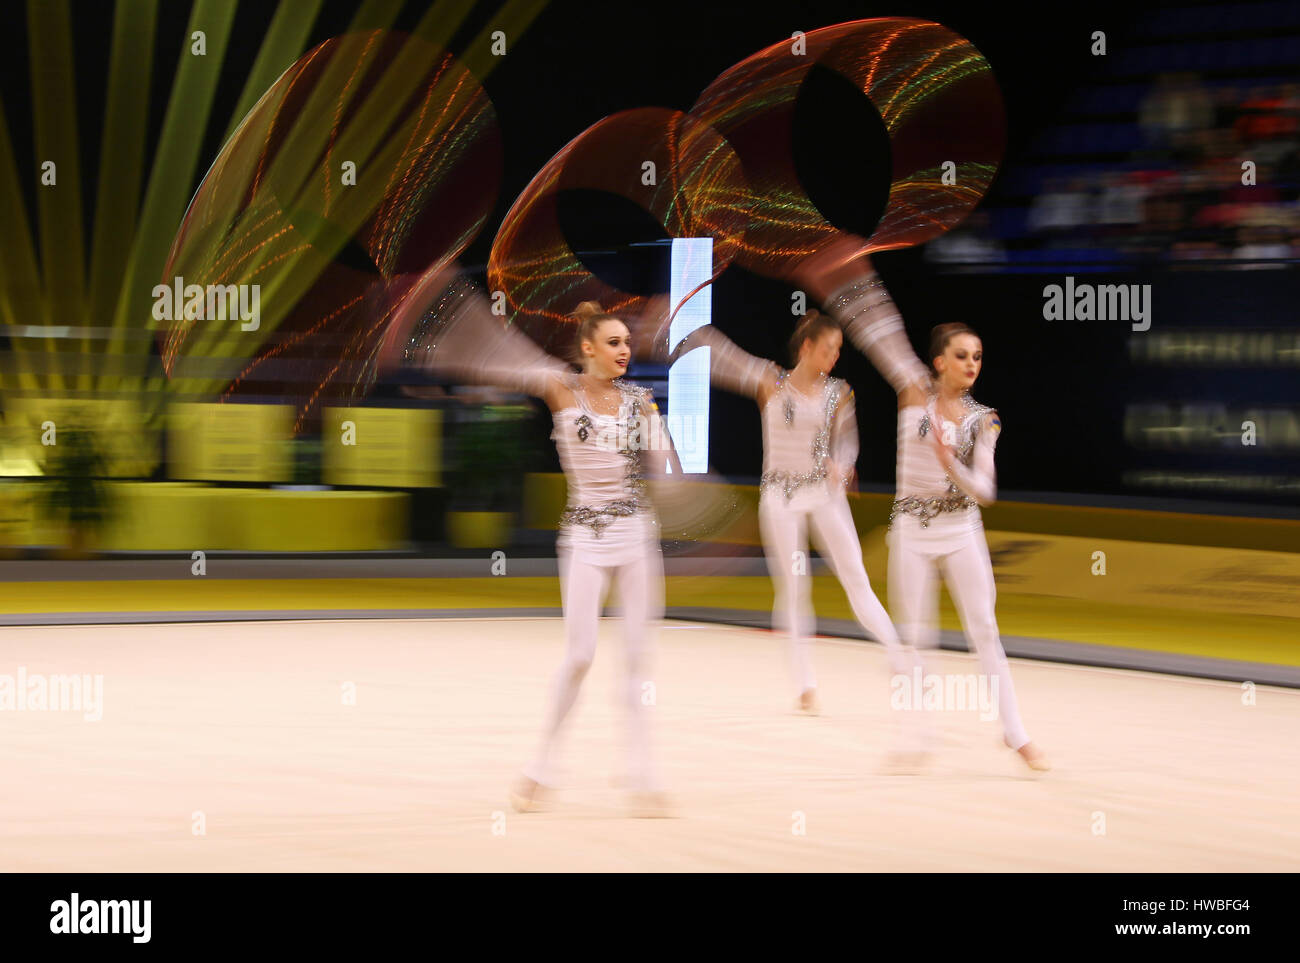 Kiev, Ukraine. 19th March, 2017. Team of Ukraine performs with 5 Hoops during Group Competition of Rhythmic Gymnastics Grand Prix 'Deriugina Cup' in Palace of Sports in Kyiv, Ukraine. Credit: Oleksandr Prykhodko/Alamy Live News Stock Photo